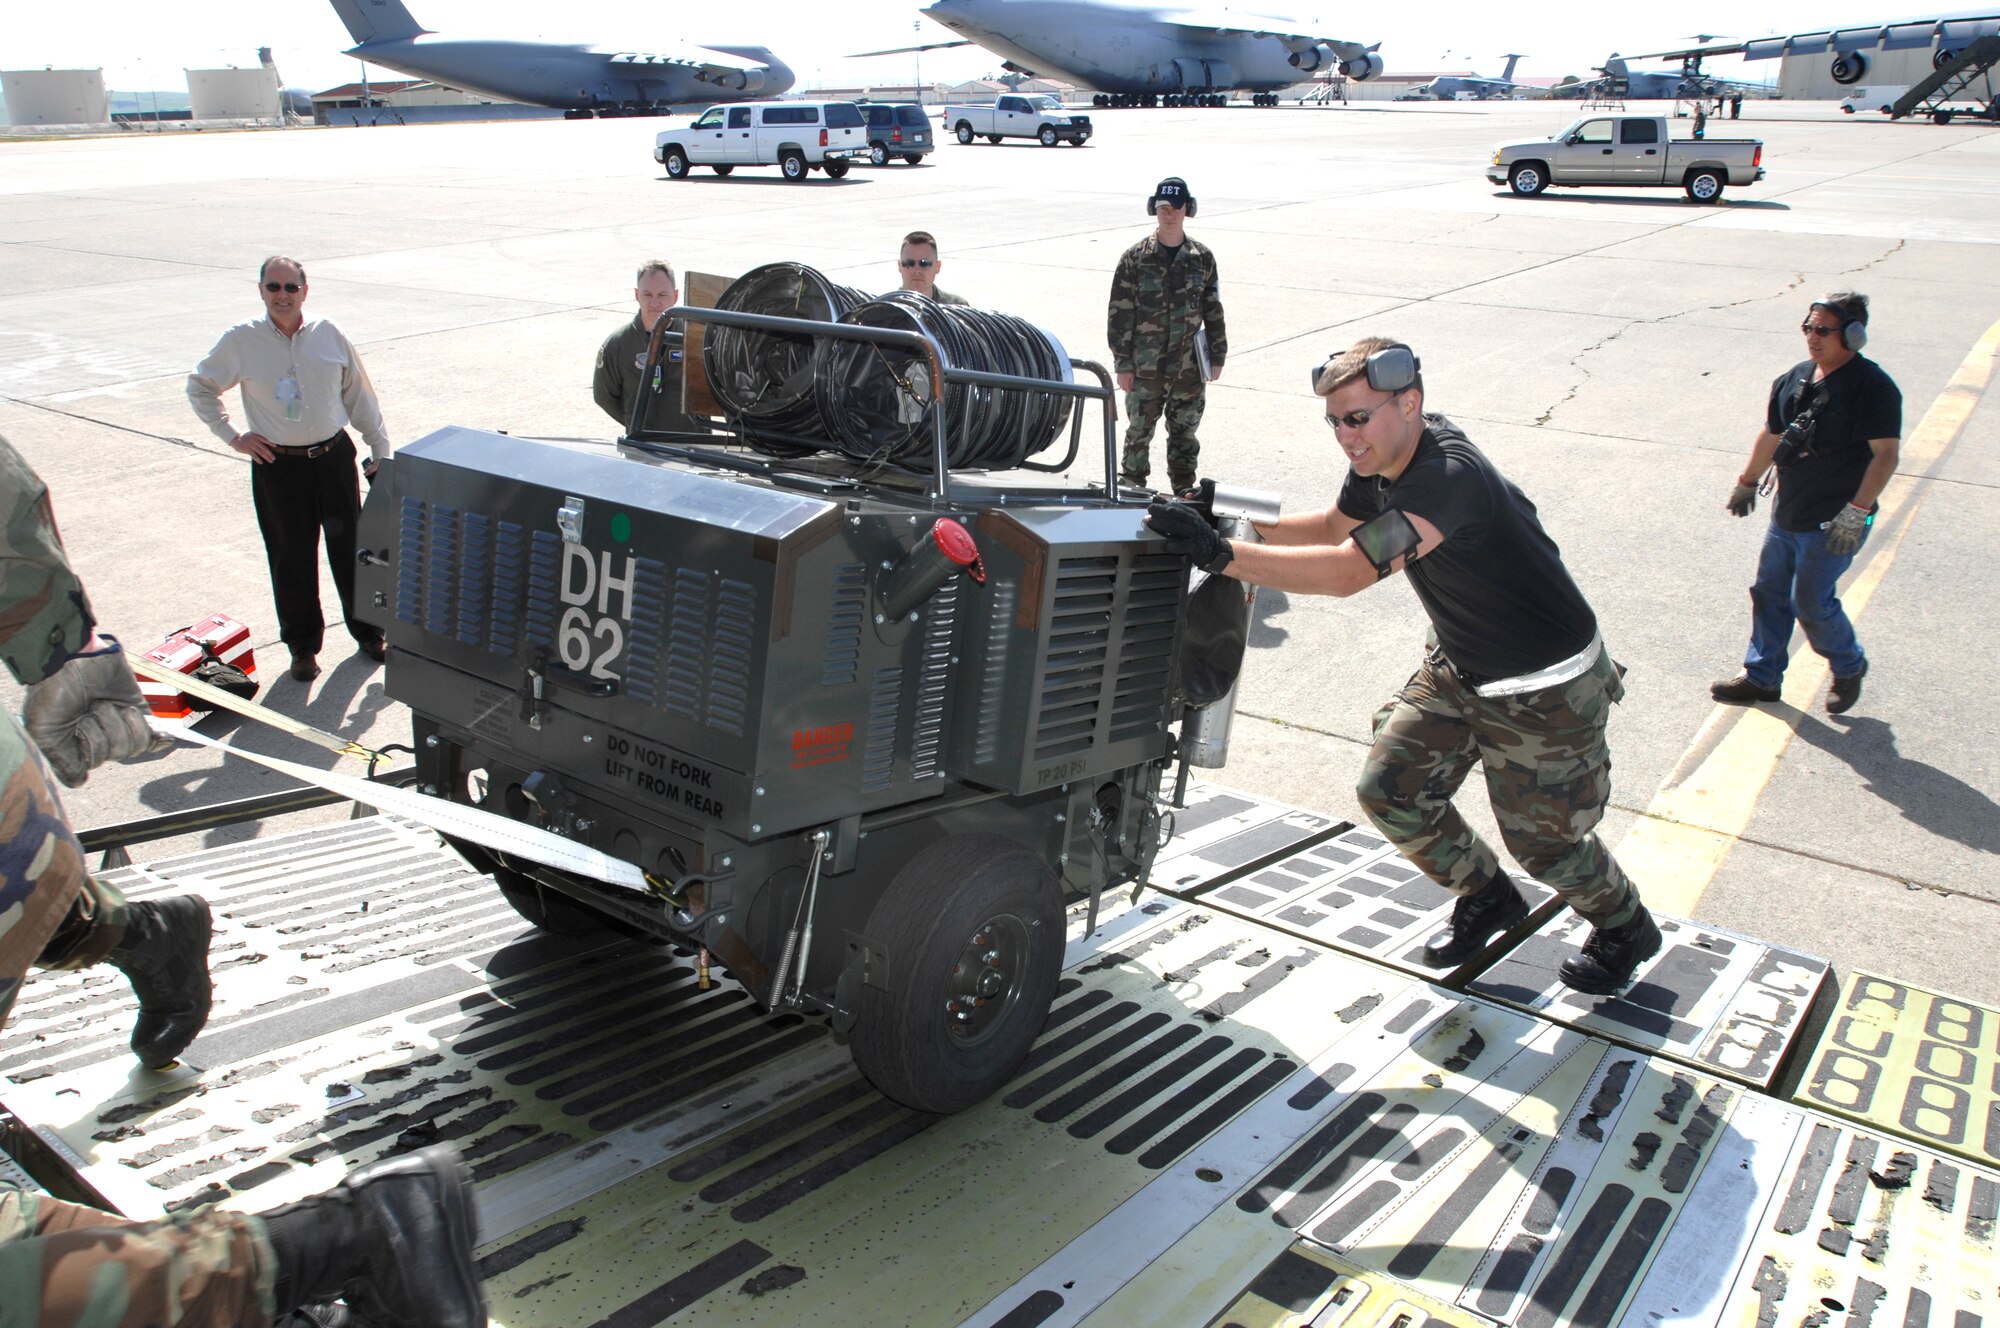 Staff Sgt. Levi Bezdecheck, 60th Aerial Port Squadron Aerial Port Expeditors Load Team member, helps push a generator up a C-5 aircraft ramp during the Crisis Look 07-02 deployment exercise held on Travis Air Force Base, Calif. (U. S. Air Force photo by Nan Wylie)